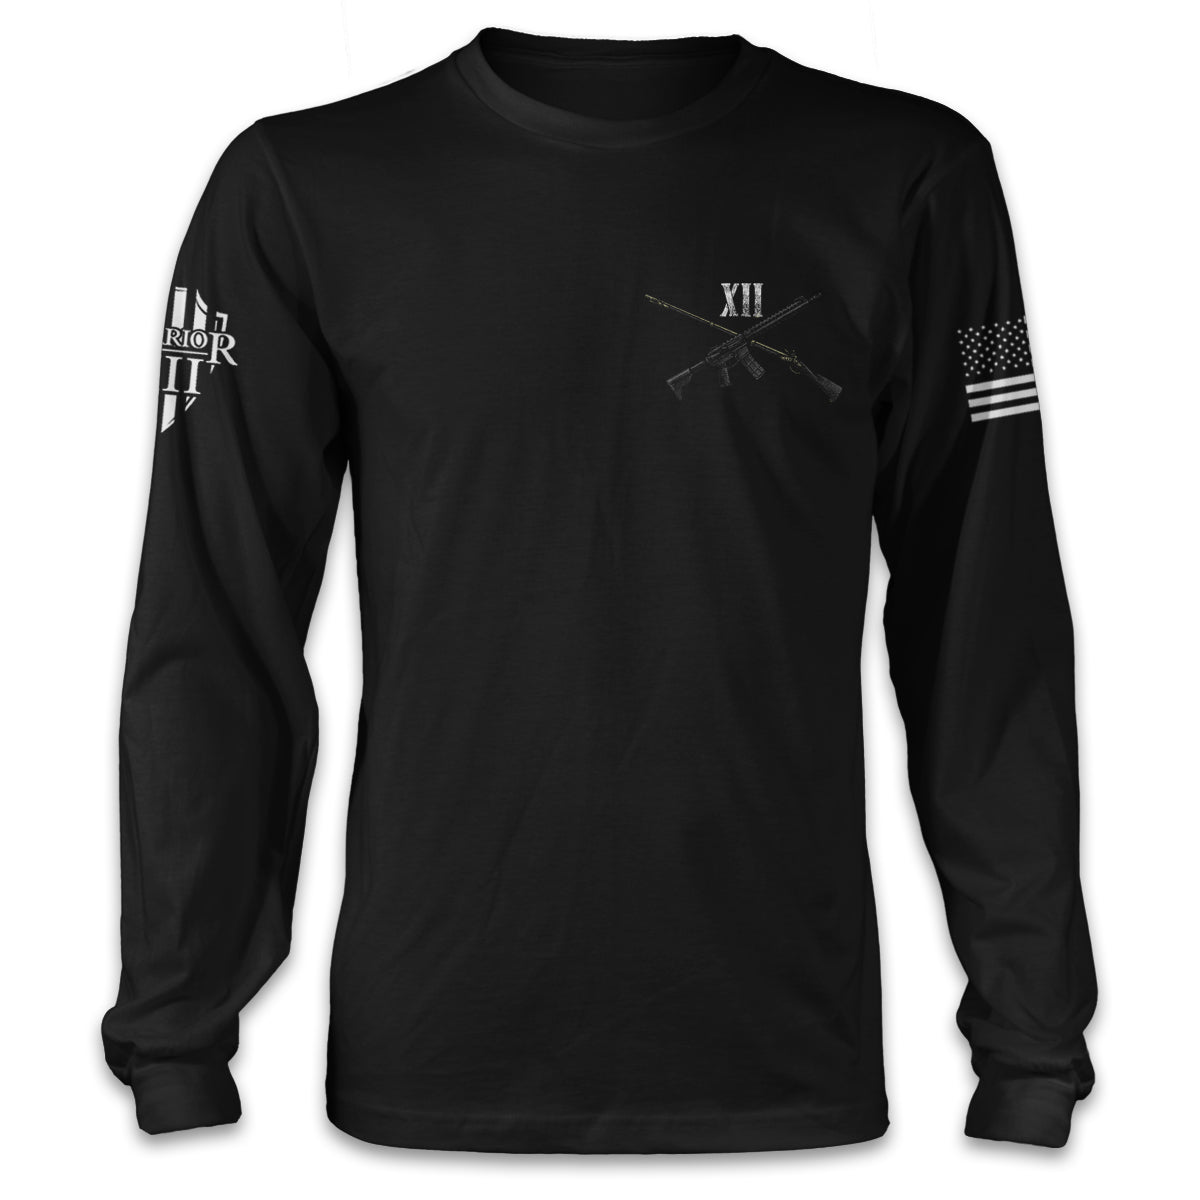 A black long sleeve shirt with two guns crossed over with the roman numerals XII printed on the front.